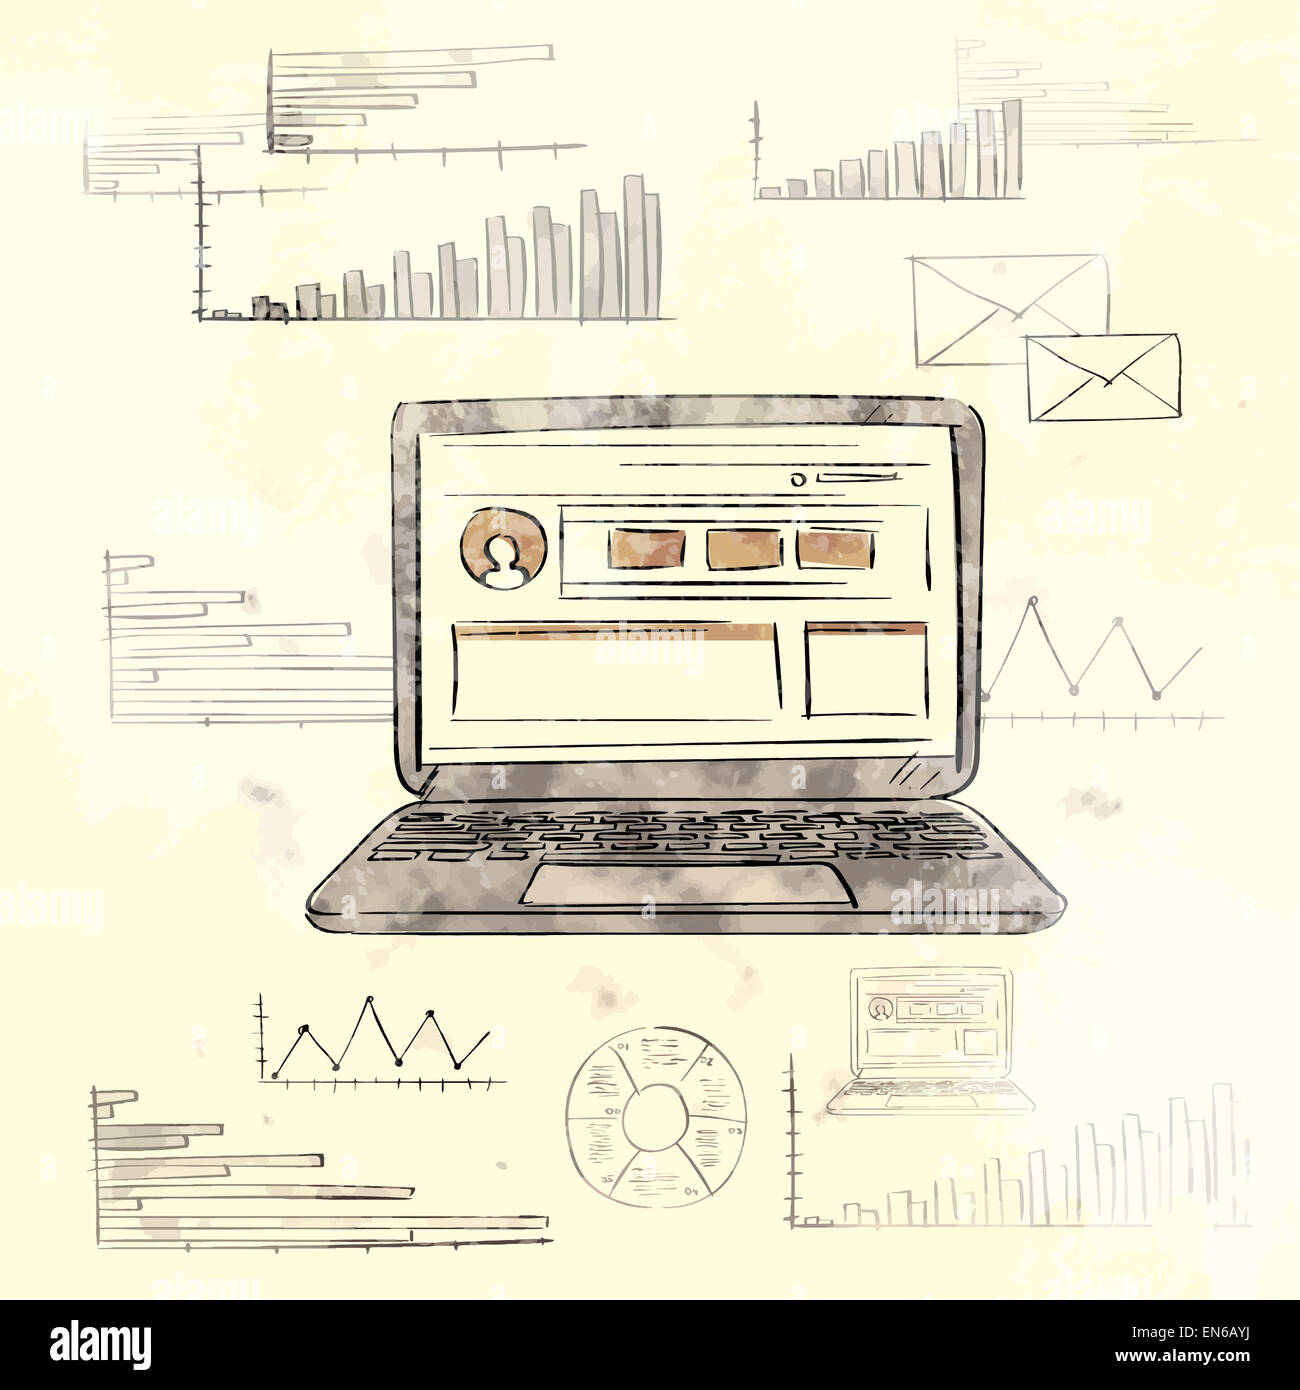 Retro Laptop with Grunge Finance Chart Old Paper Stock Photo